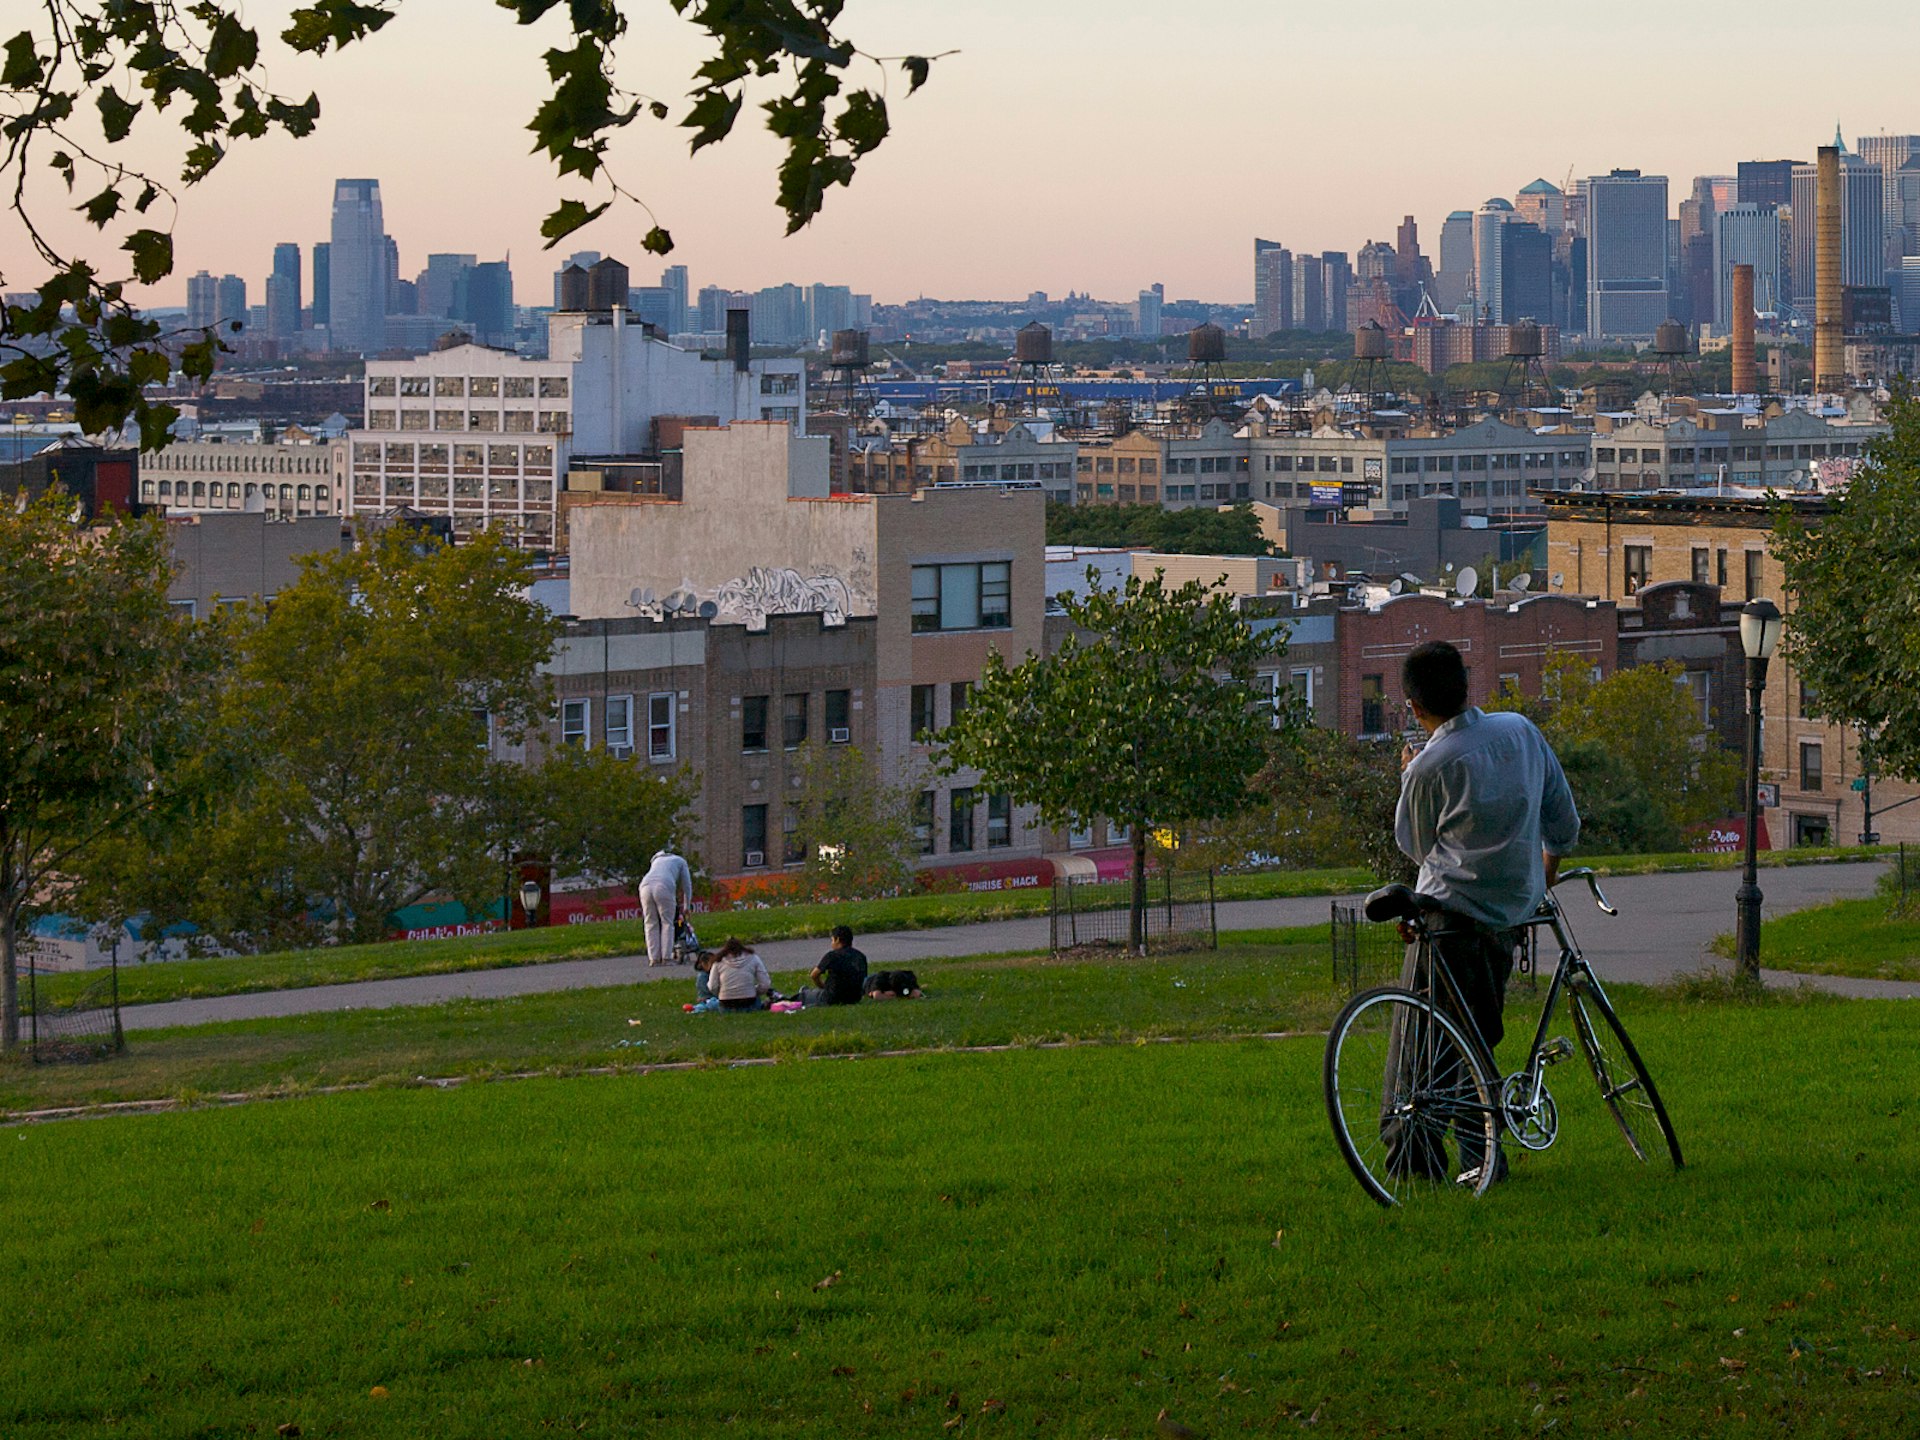 Sunset Park offers spectacular views of the Manhattan skyline © Barry Winiker / Getty Images